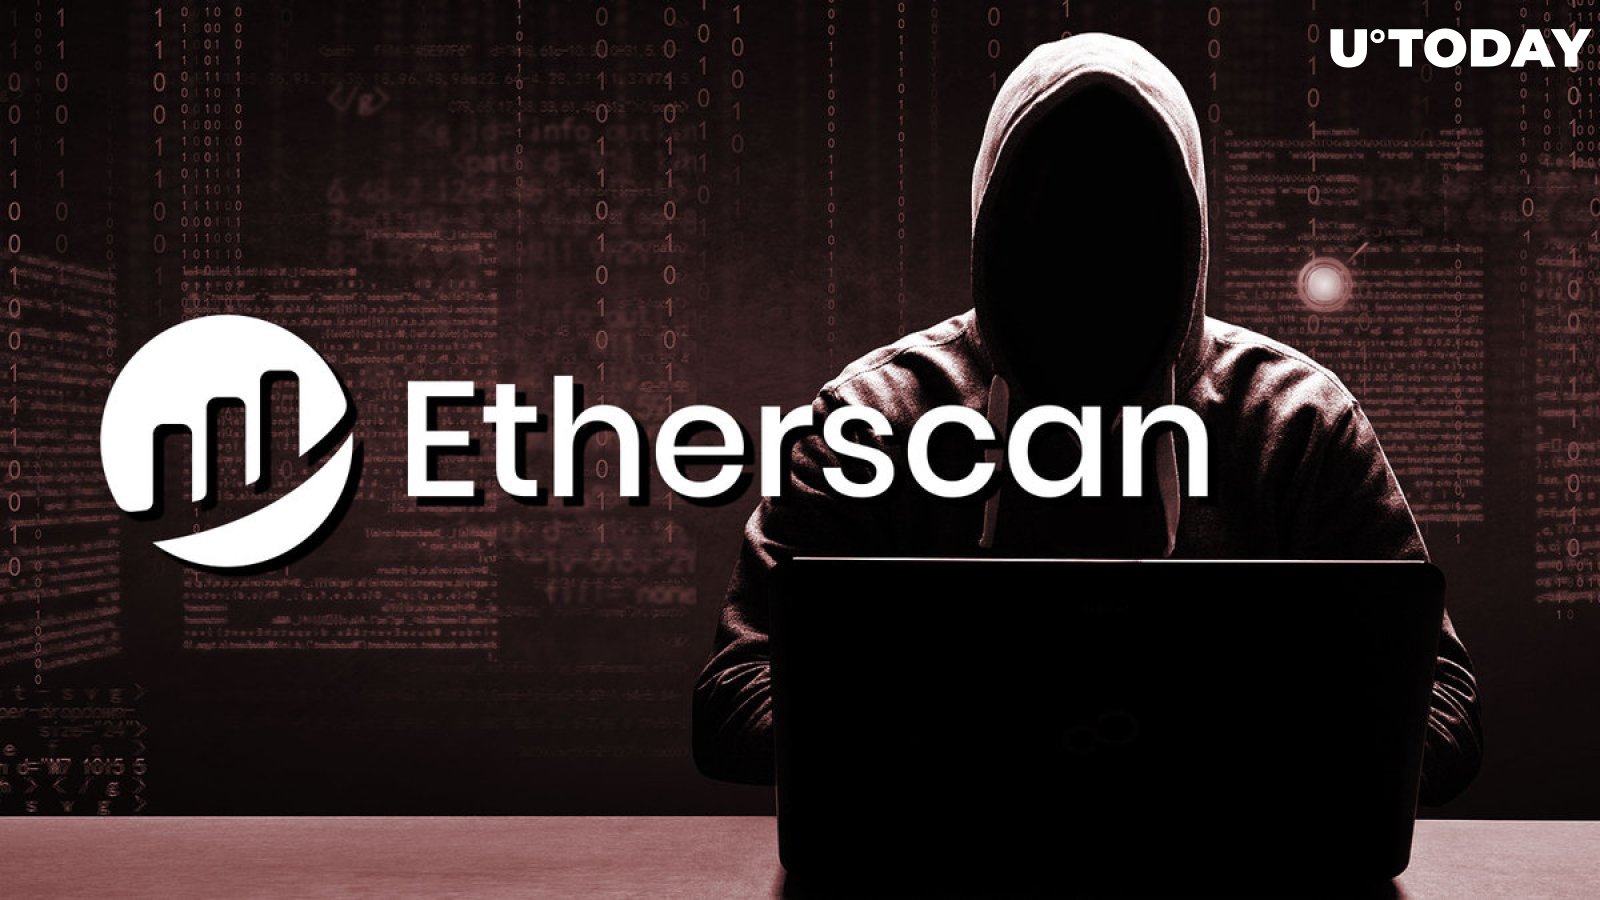 Here's How to Detect Crypto Scam With Etherscan Knowing Only Website Name